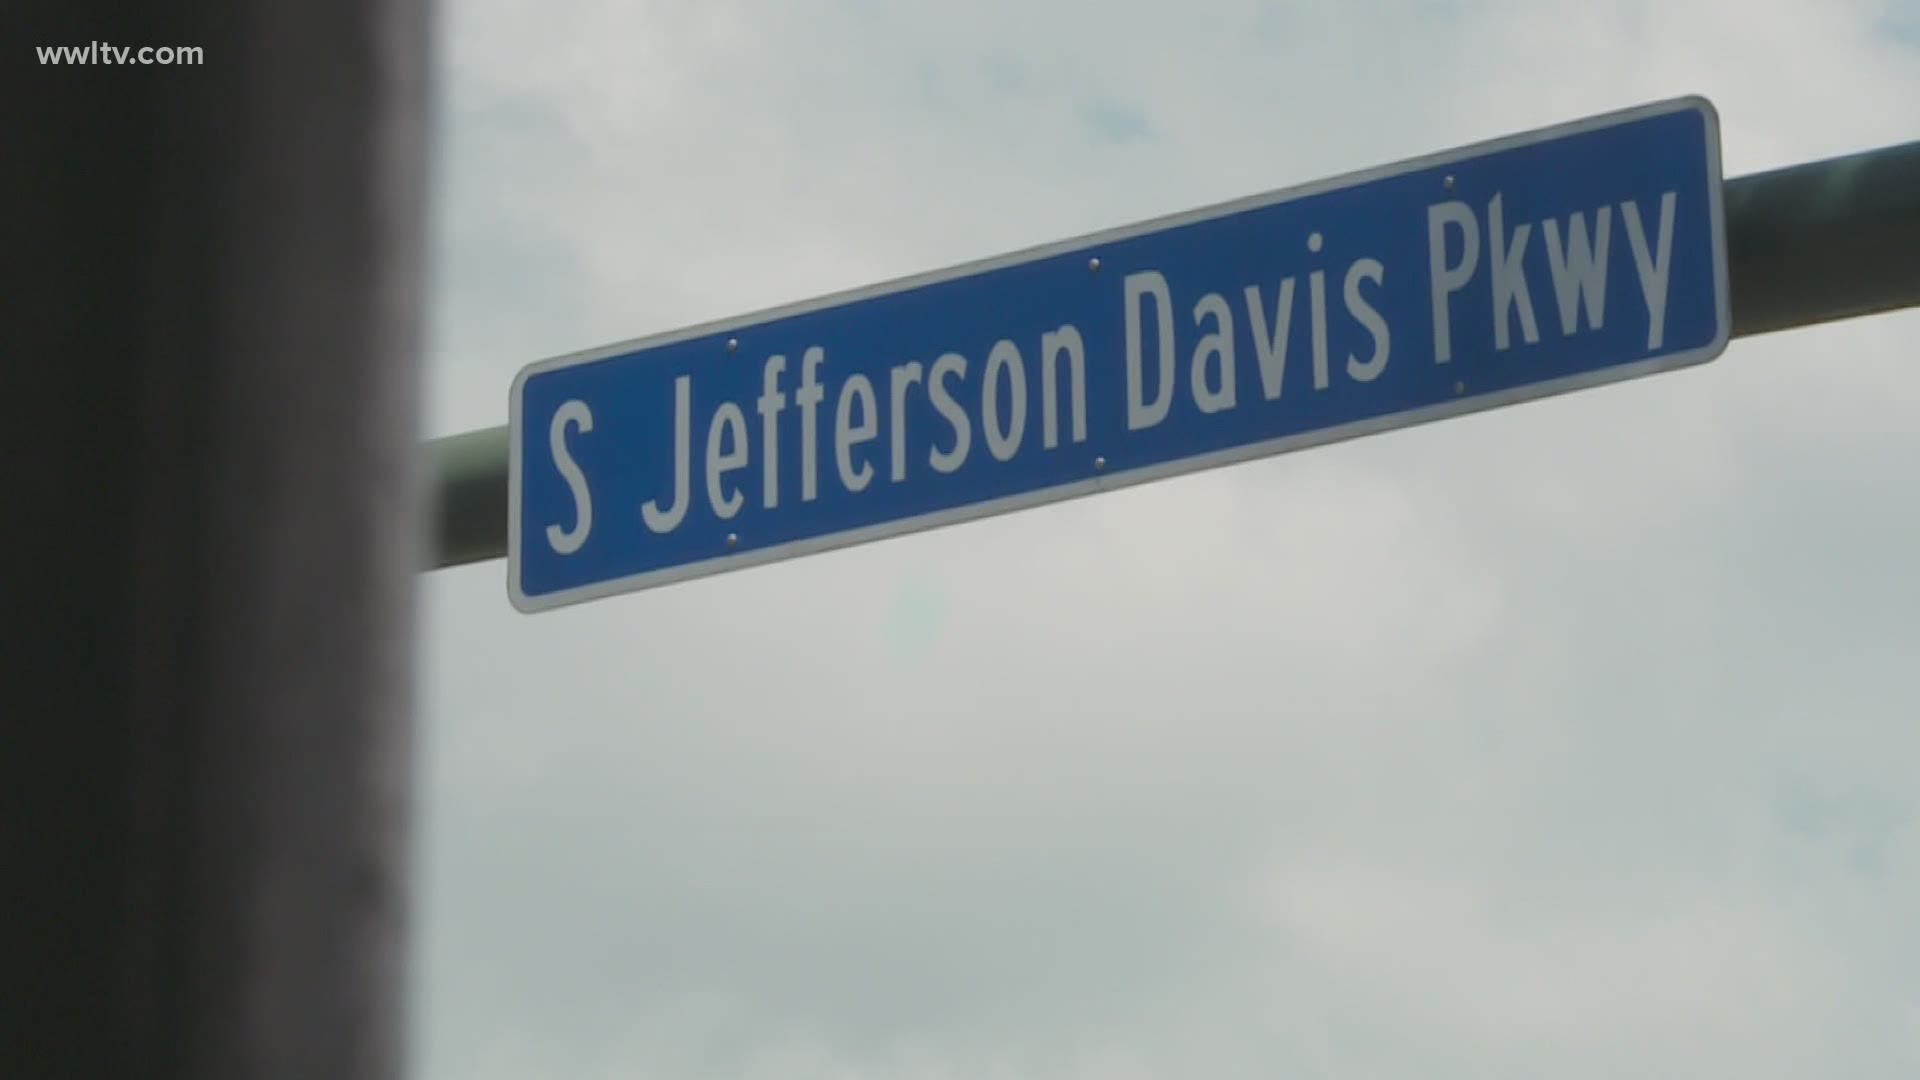 City Council pushes forward with plans to rename New Orleans streets